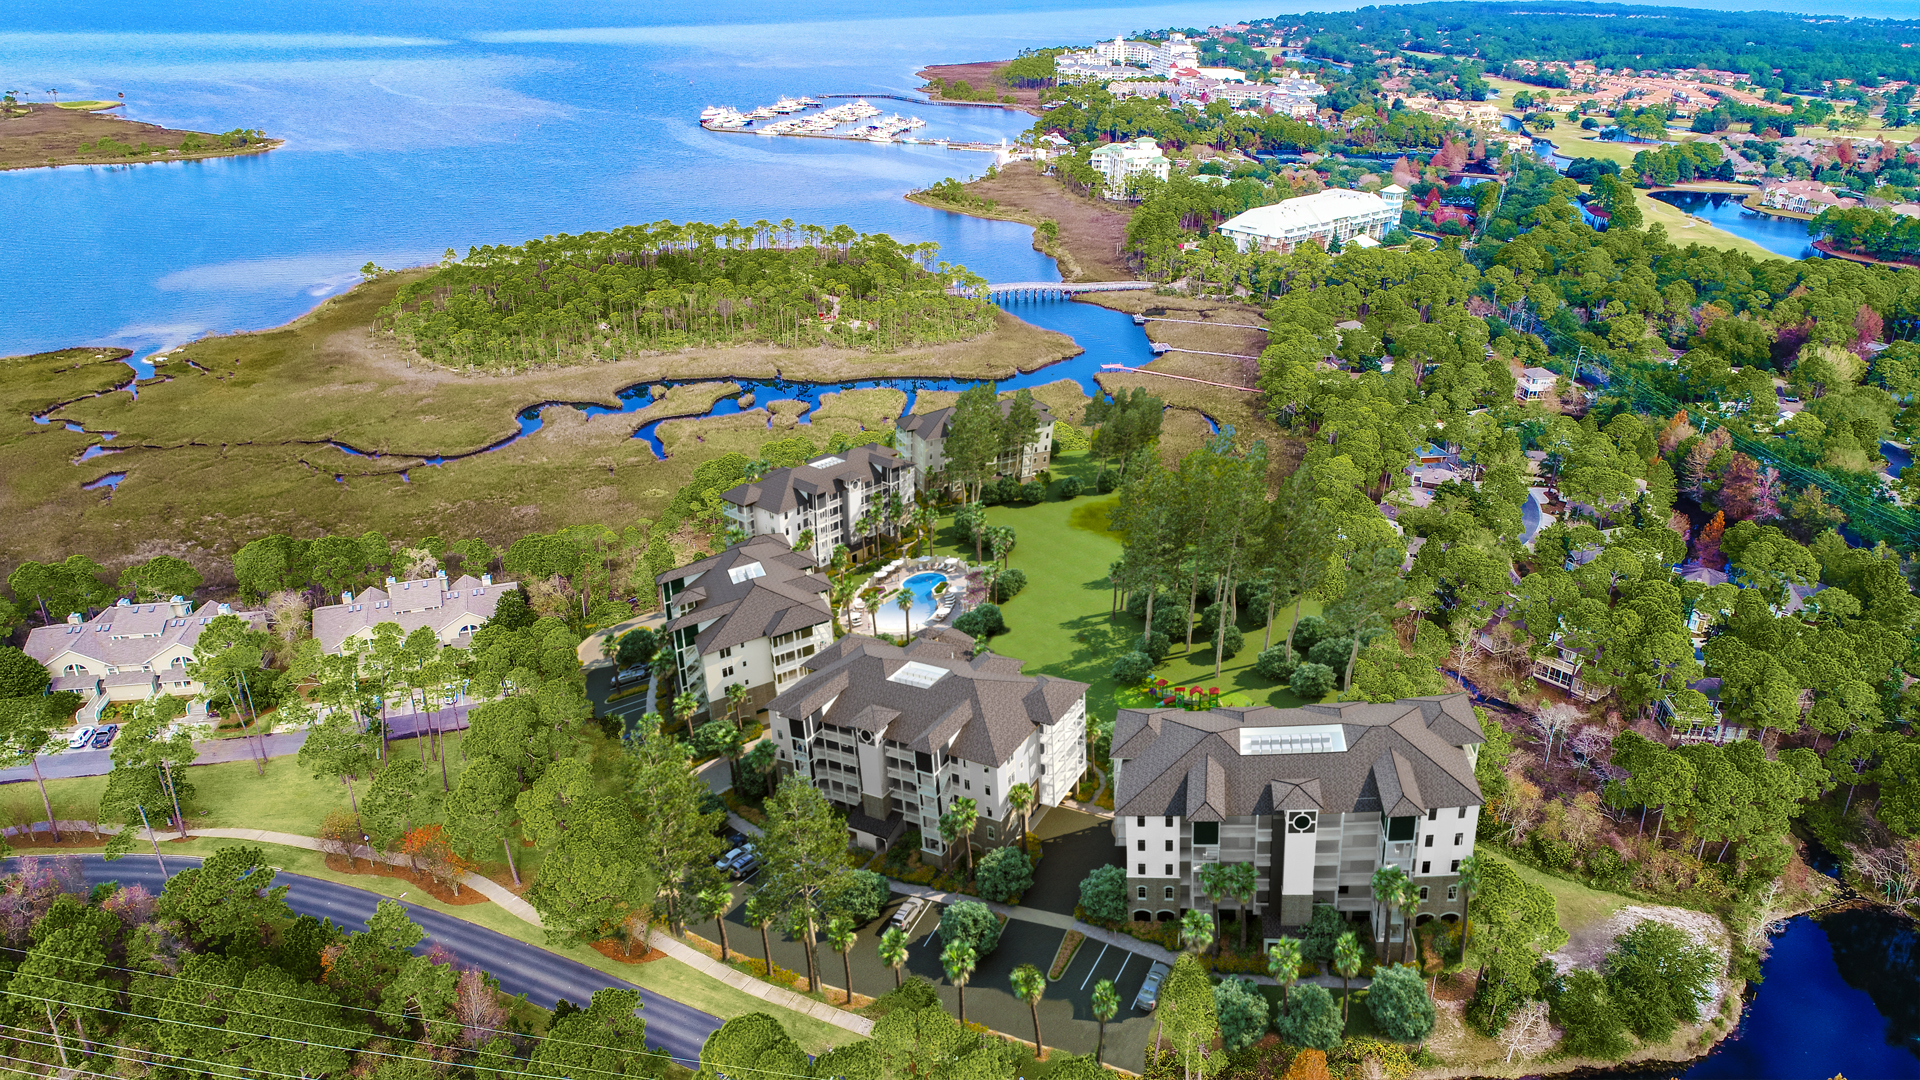 Sandestin Golf and Beach Resort is taking reservations now for the much anticipated, Osprey Pointe. The first new accommodations inside the gates of Sandestin in more than 12 years will welcome guests beginning March 2020. The 77-unit condominium complex offers luxurious 2, 3 and 4-bedroom vacation rental properties with captivating views of Choctawhatchee Bay, nature preserves and views of the exclusive Osprey Pointe Pool.